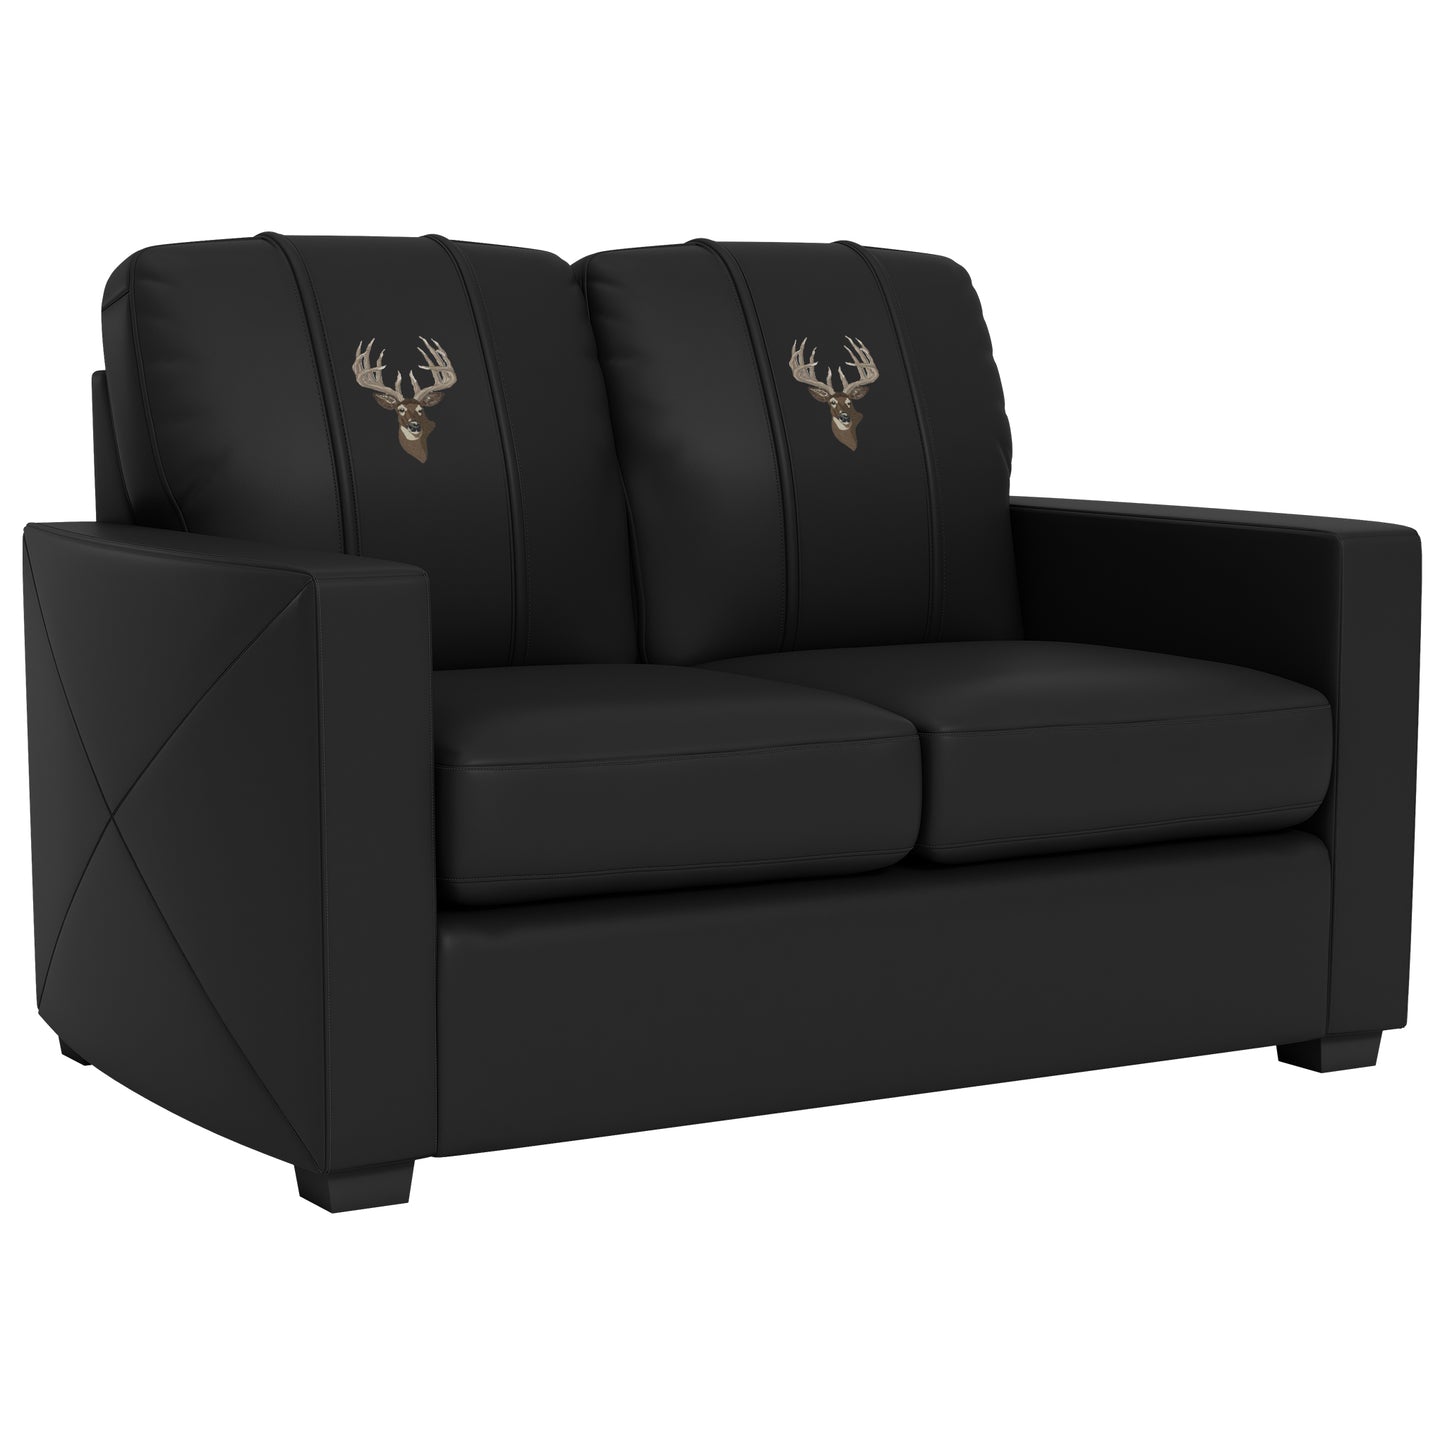 Silver Loveseat with Deer Head-Whitetail Logo